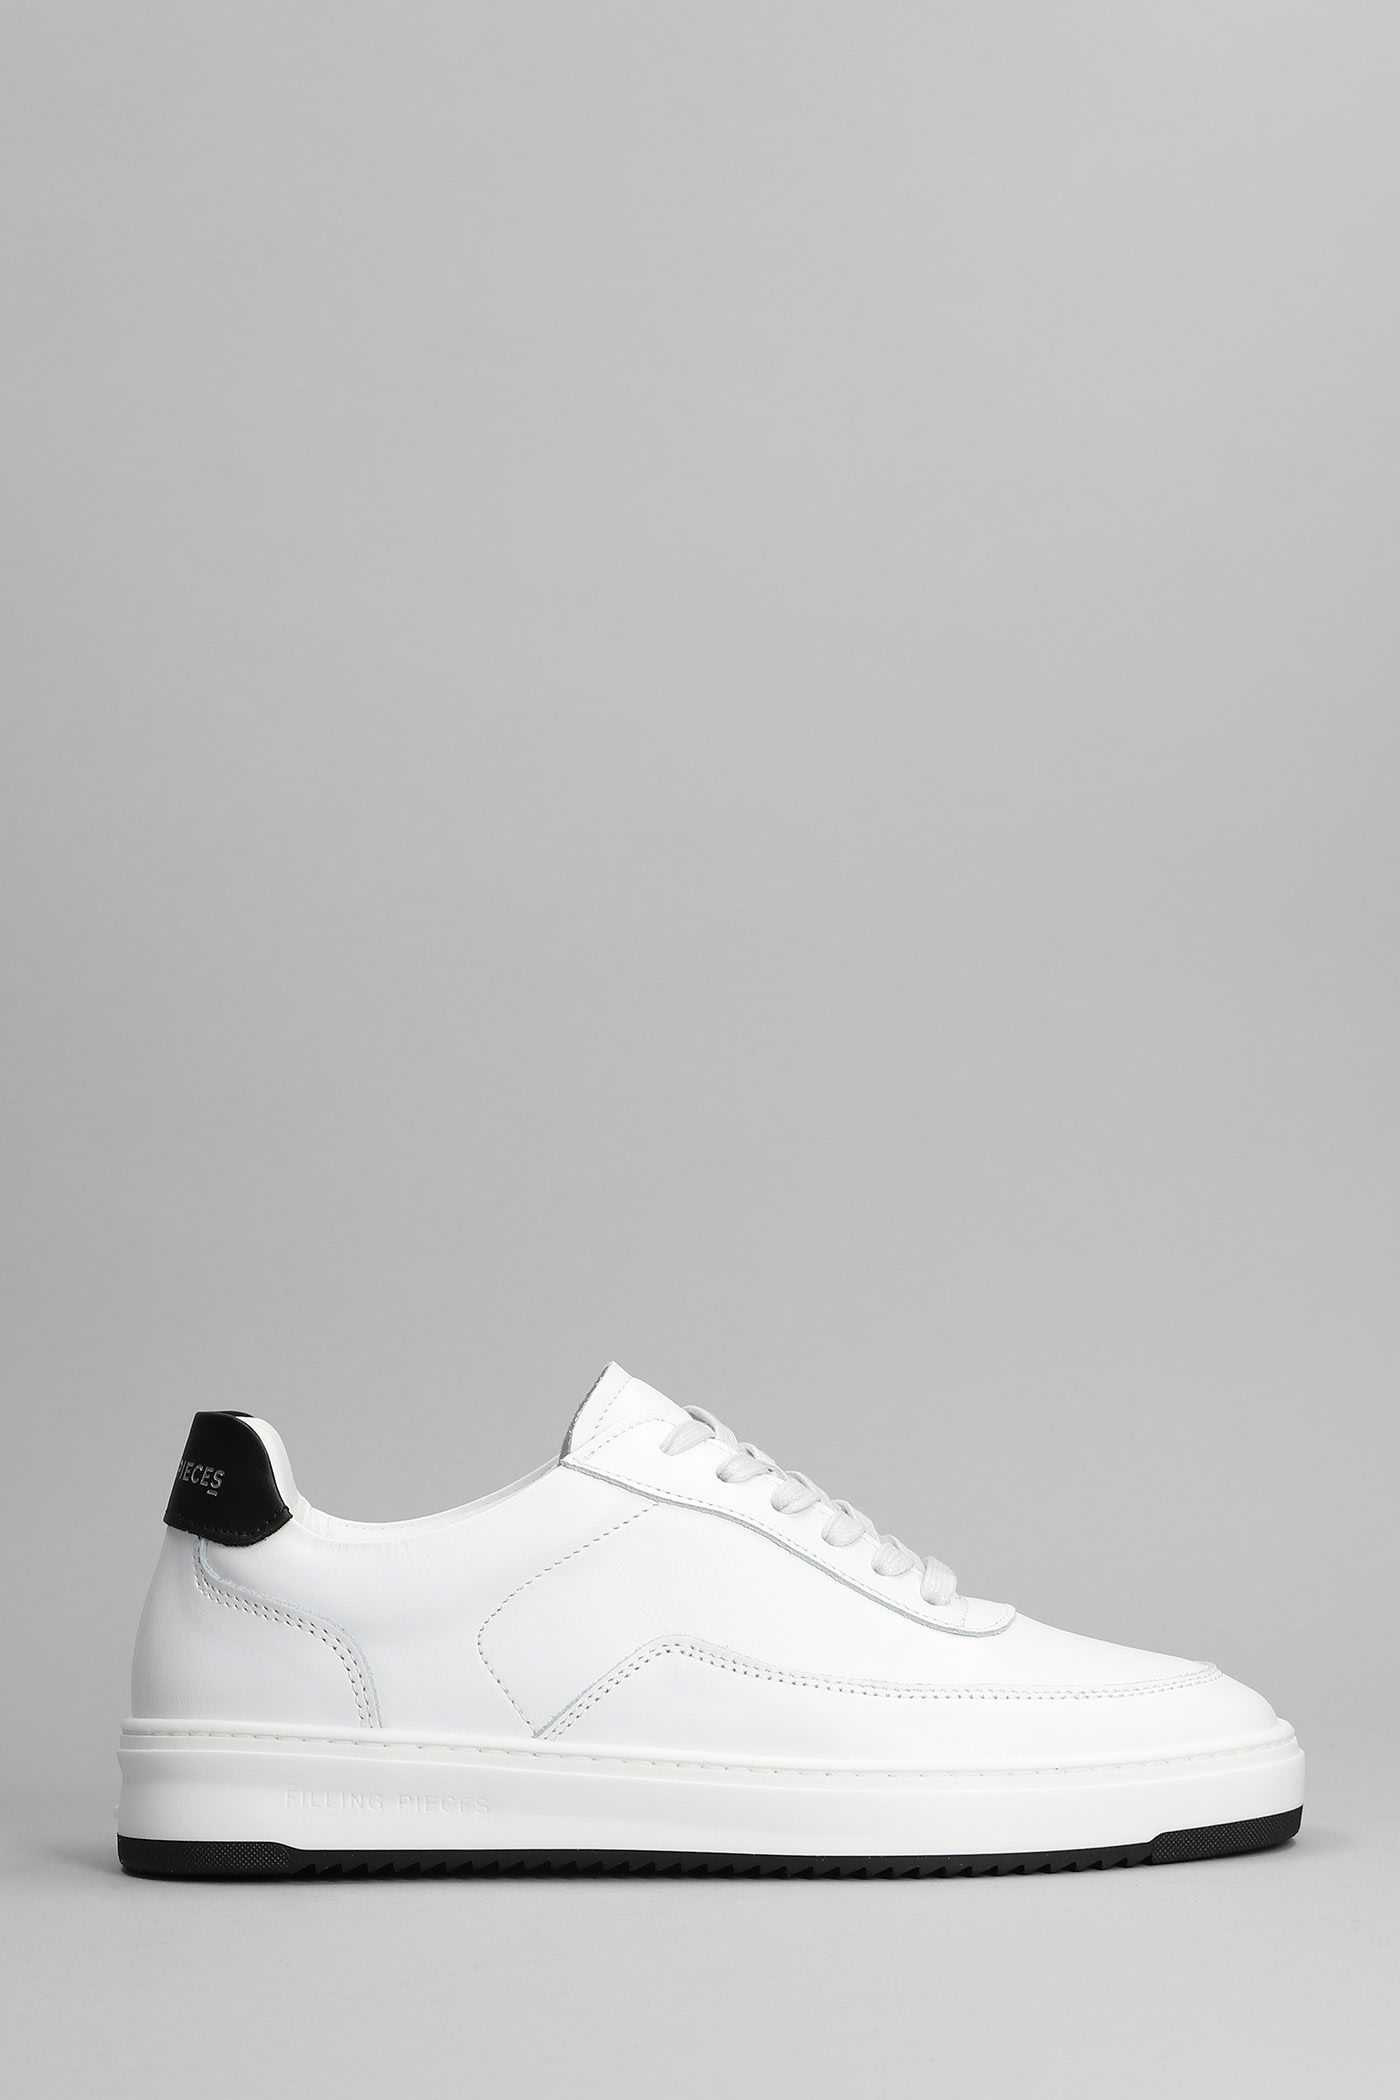 Filling Pieces Mondo Lux Sneakers In White Leather